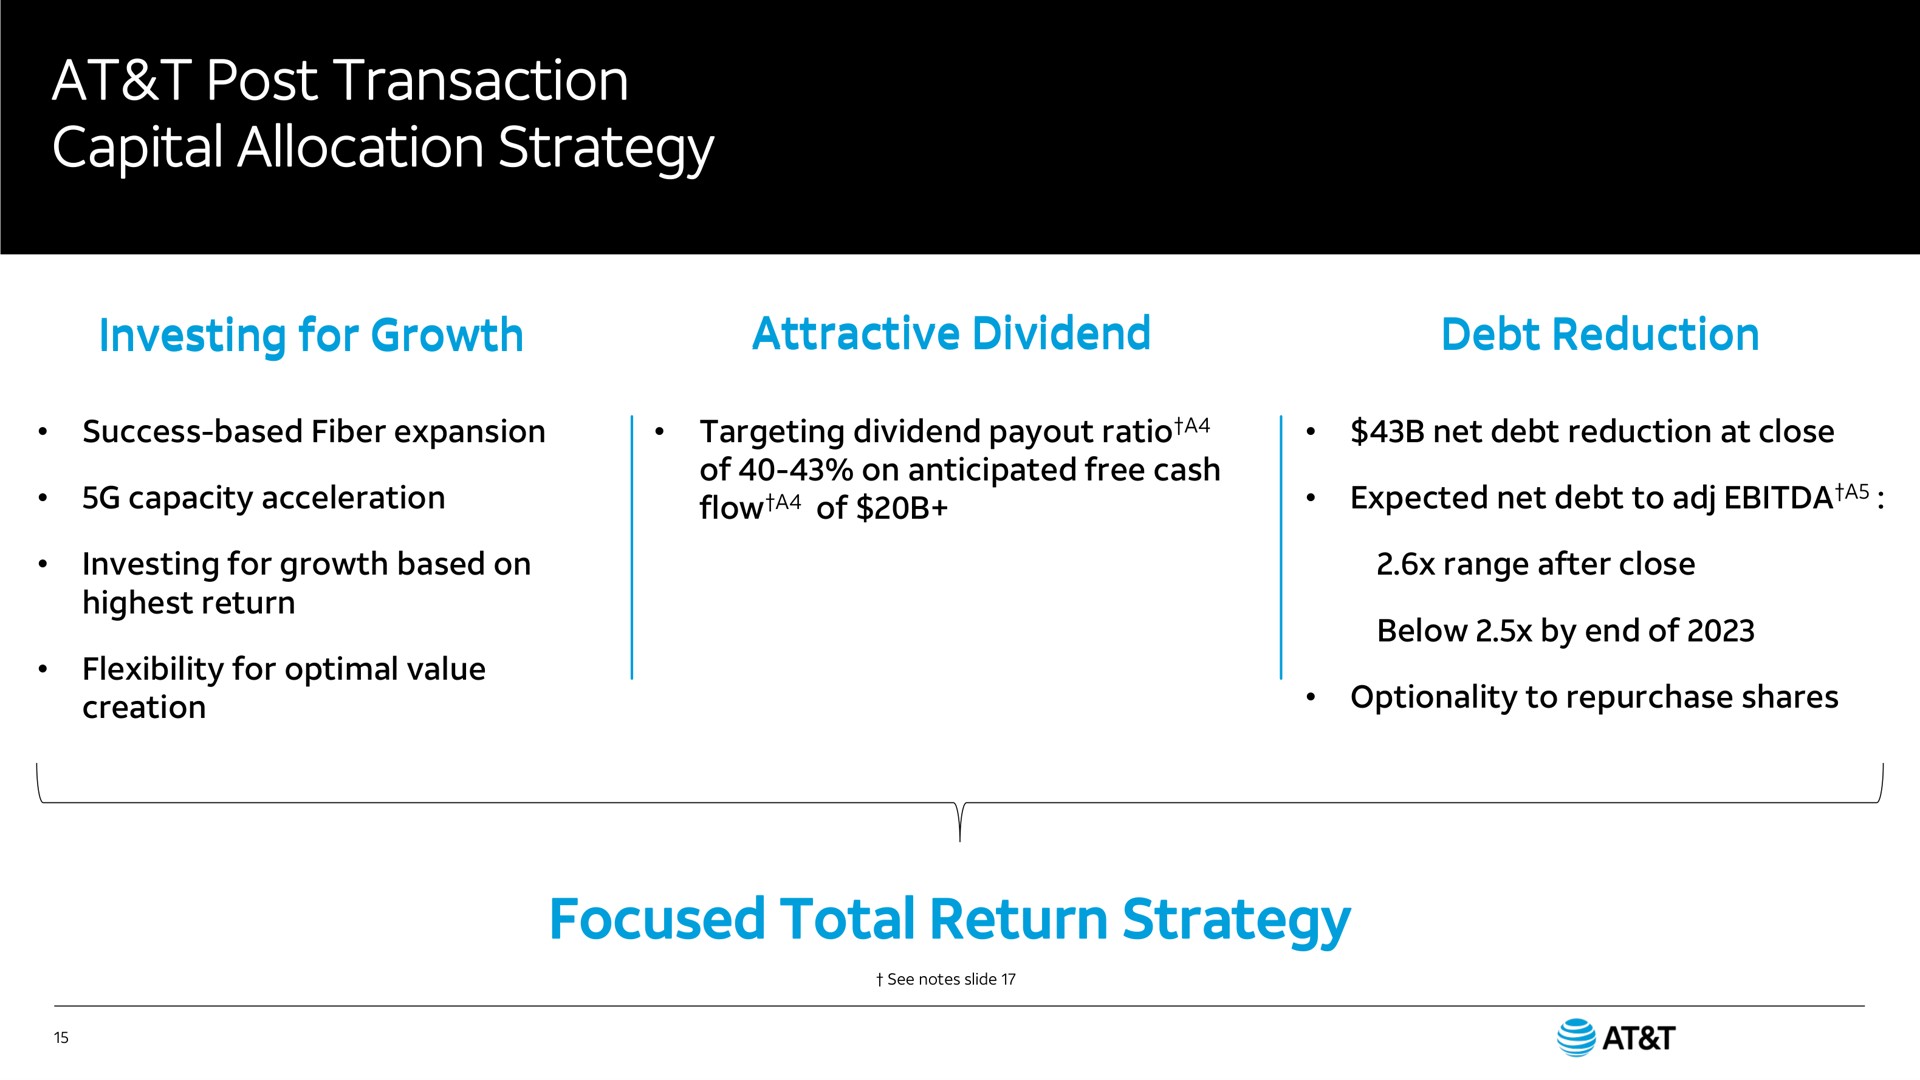 at post transaction capital allocation strategy focused total return strategy | AT&T